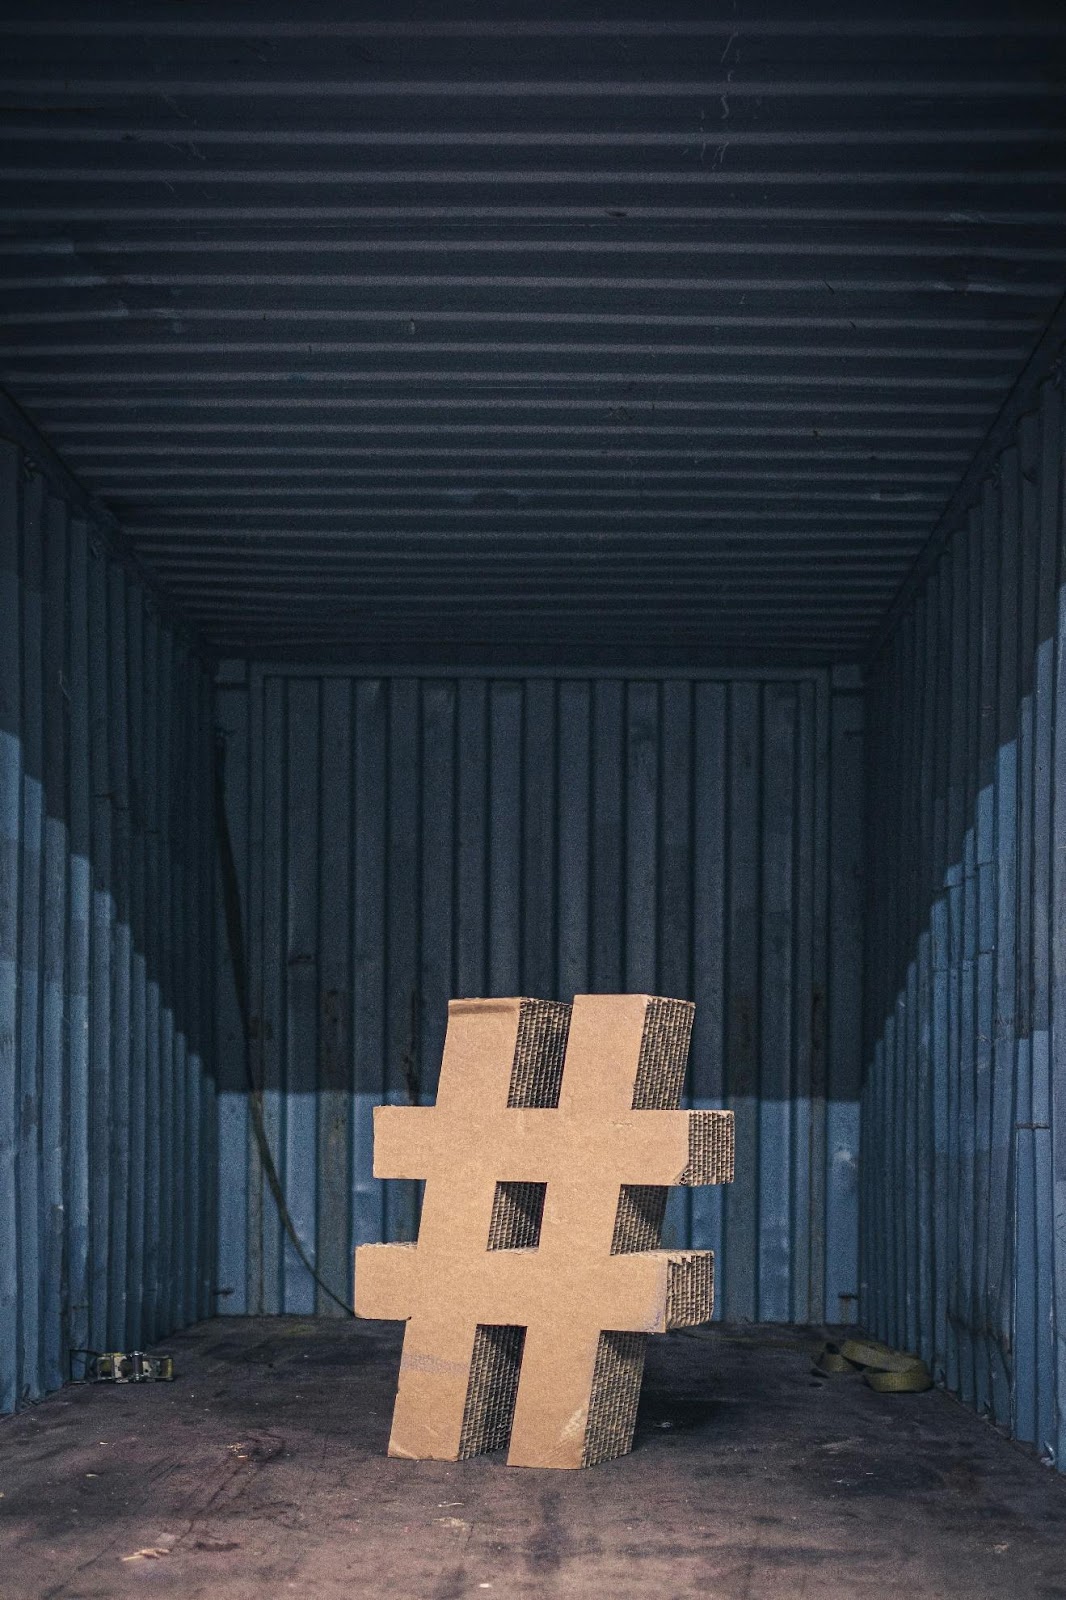 A cardboard hashtag in a container
Description automatically generated